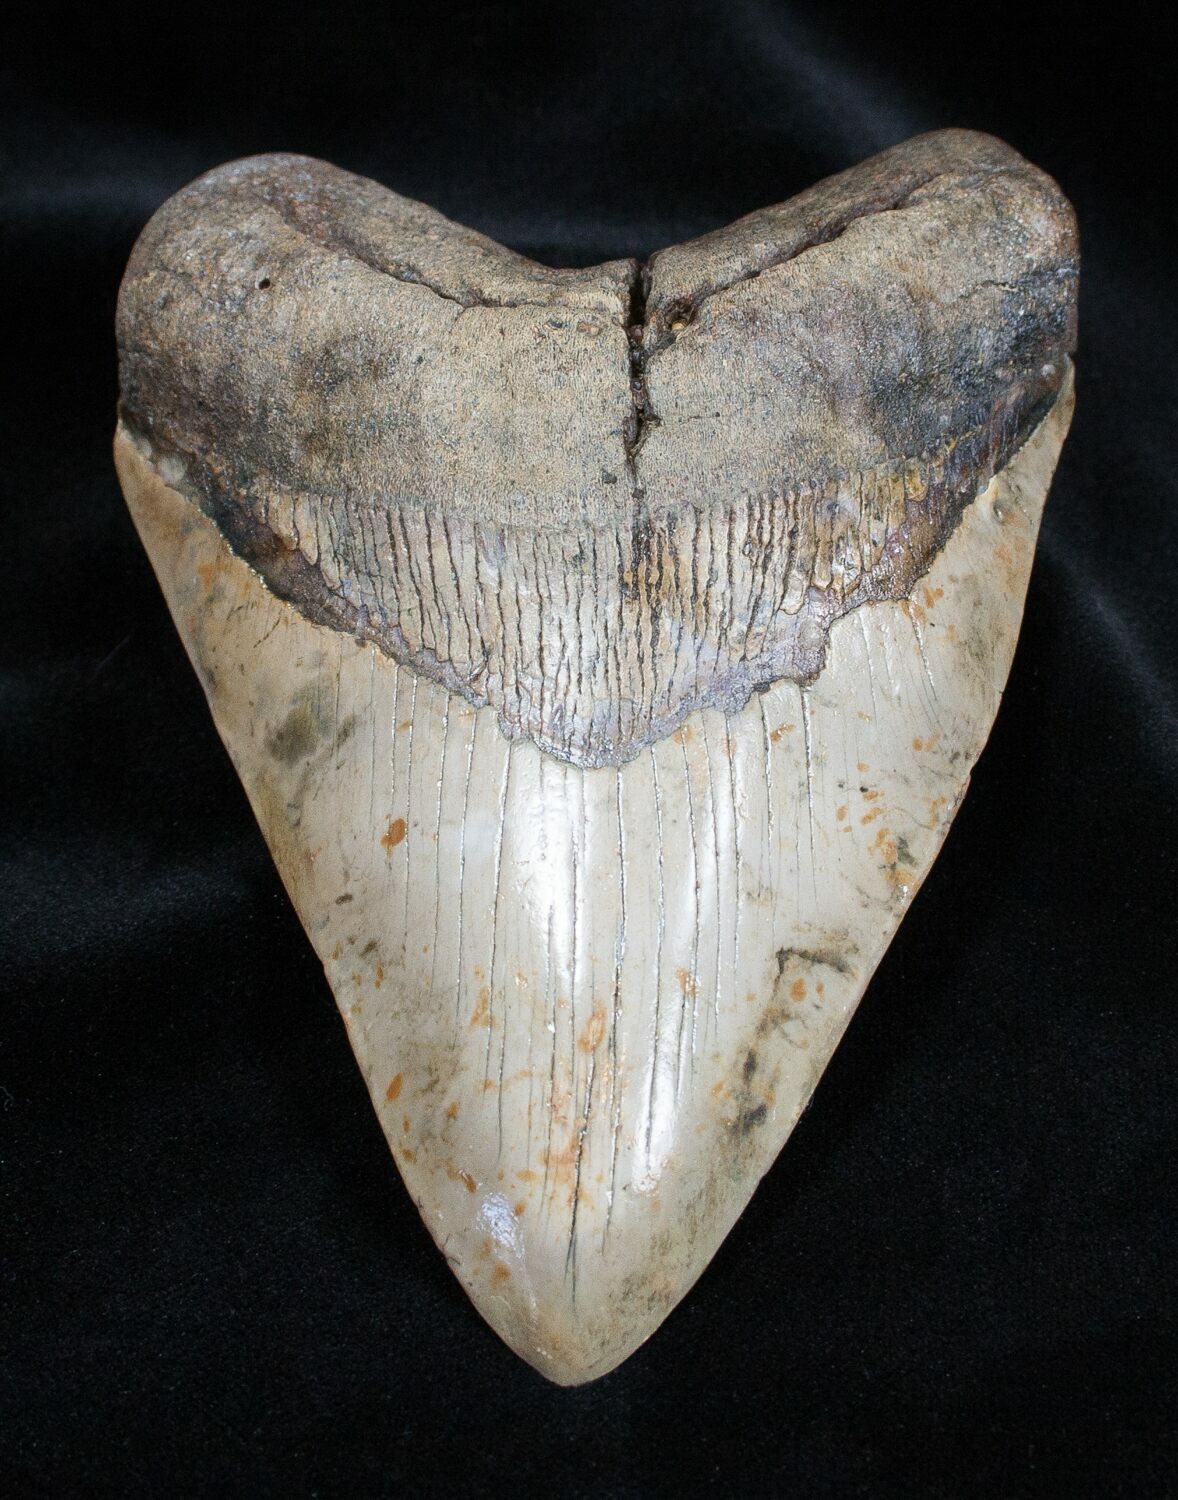 Impressive 5.75 Inch Megalodon Tooth For Sale (#1667) - FossilEra.com